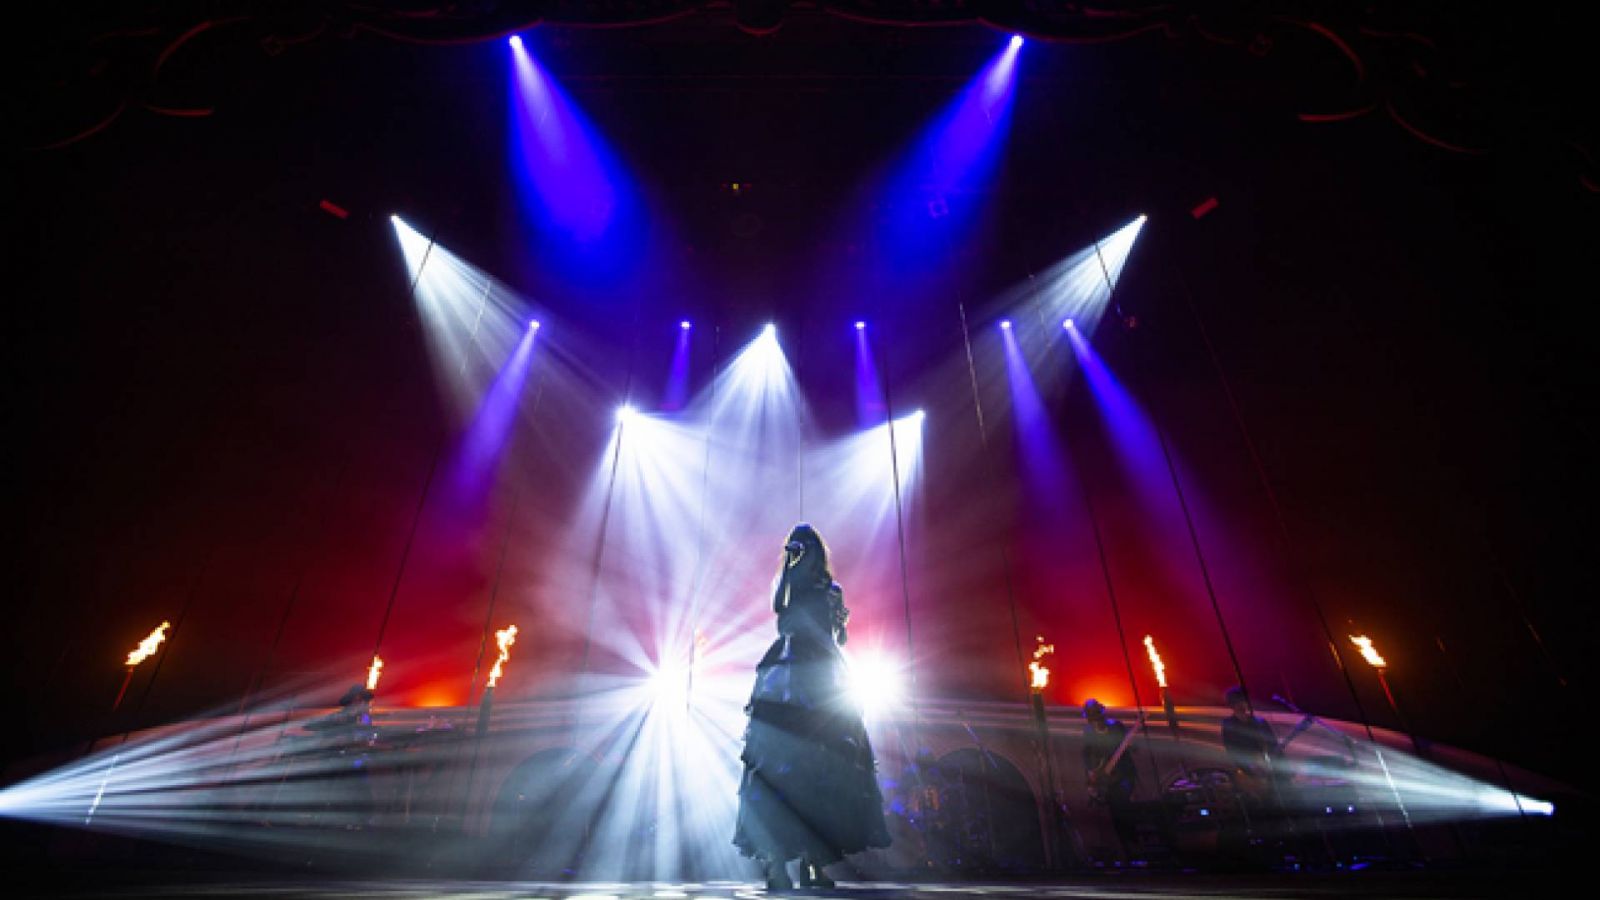 Aimer Hall Tour 18/19 "soleil et pluie" w Tokyo International Forum © SonyMusic. All rights reserved.